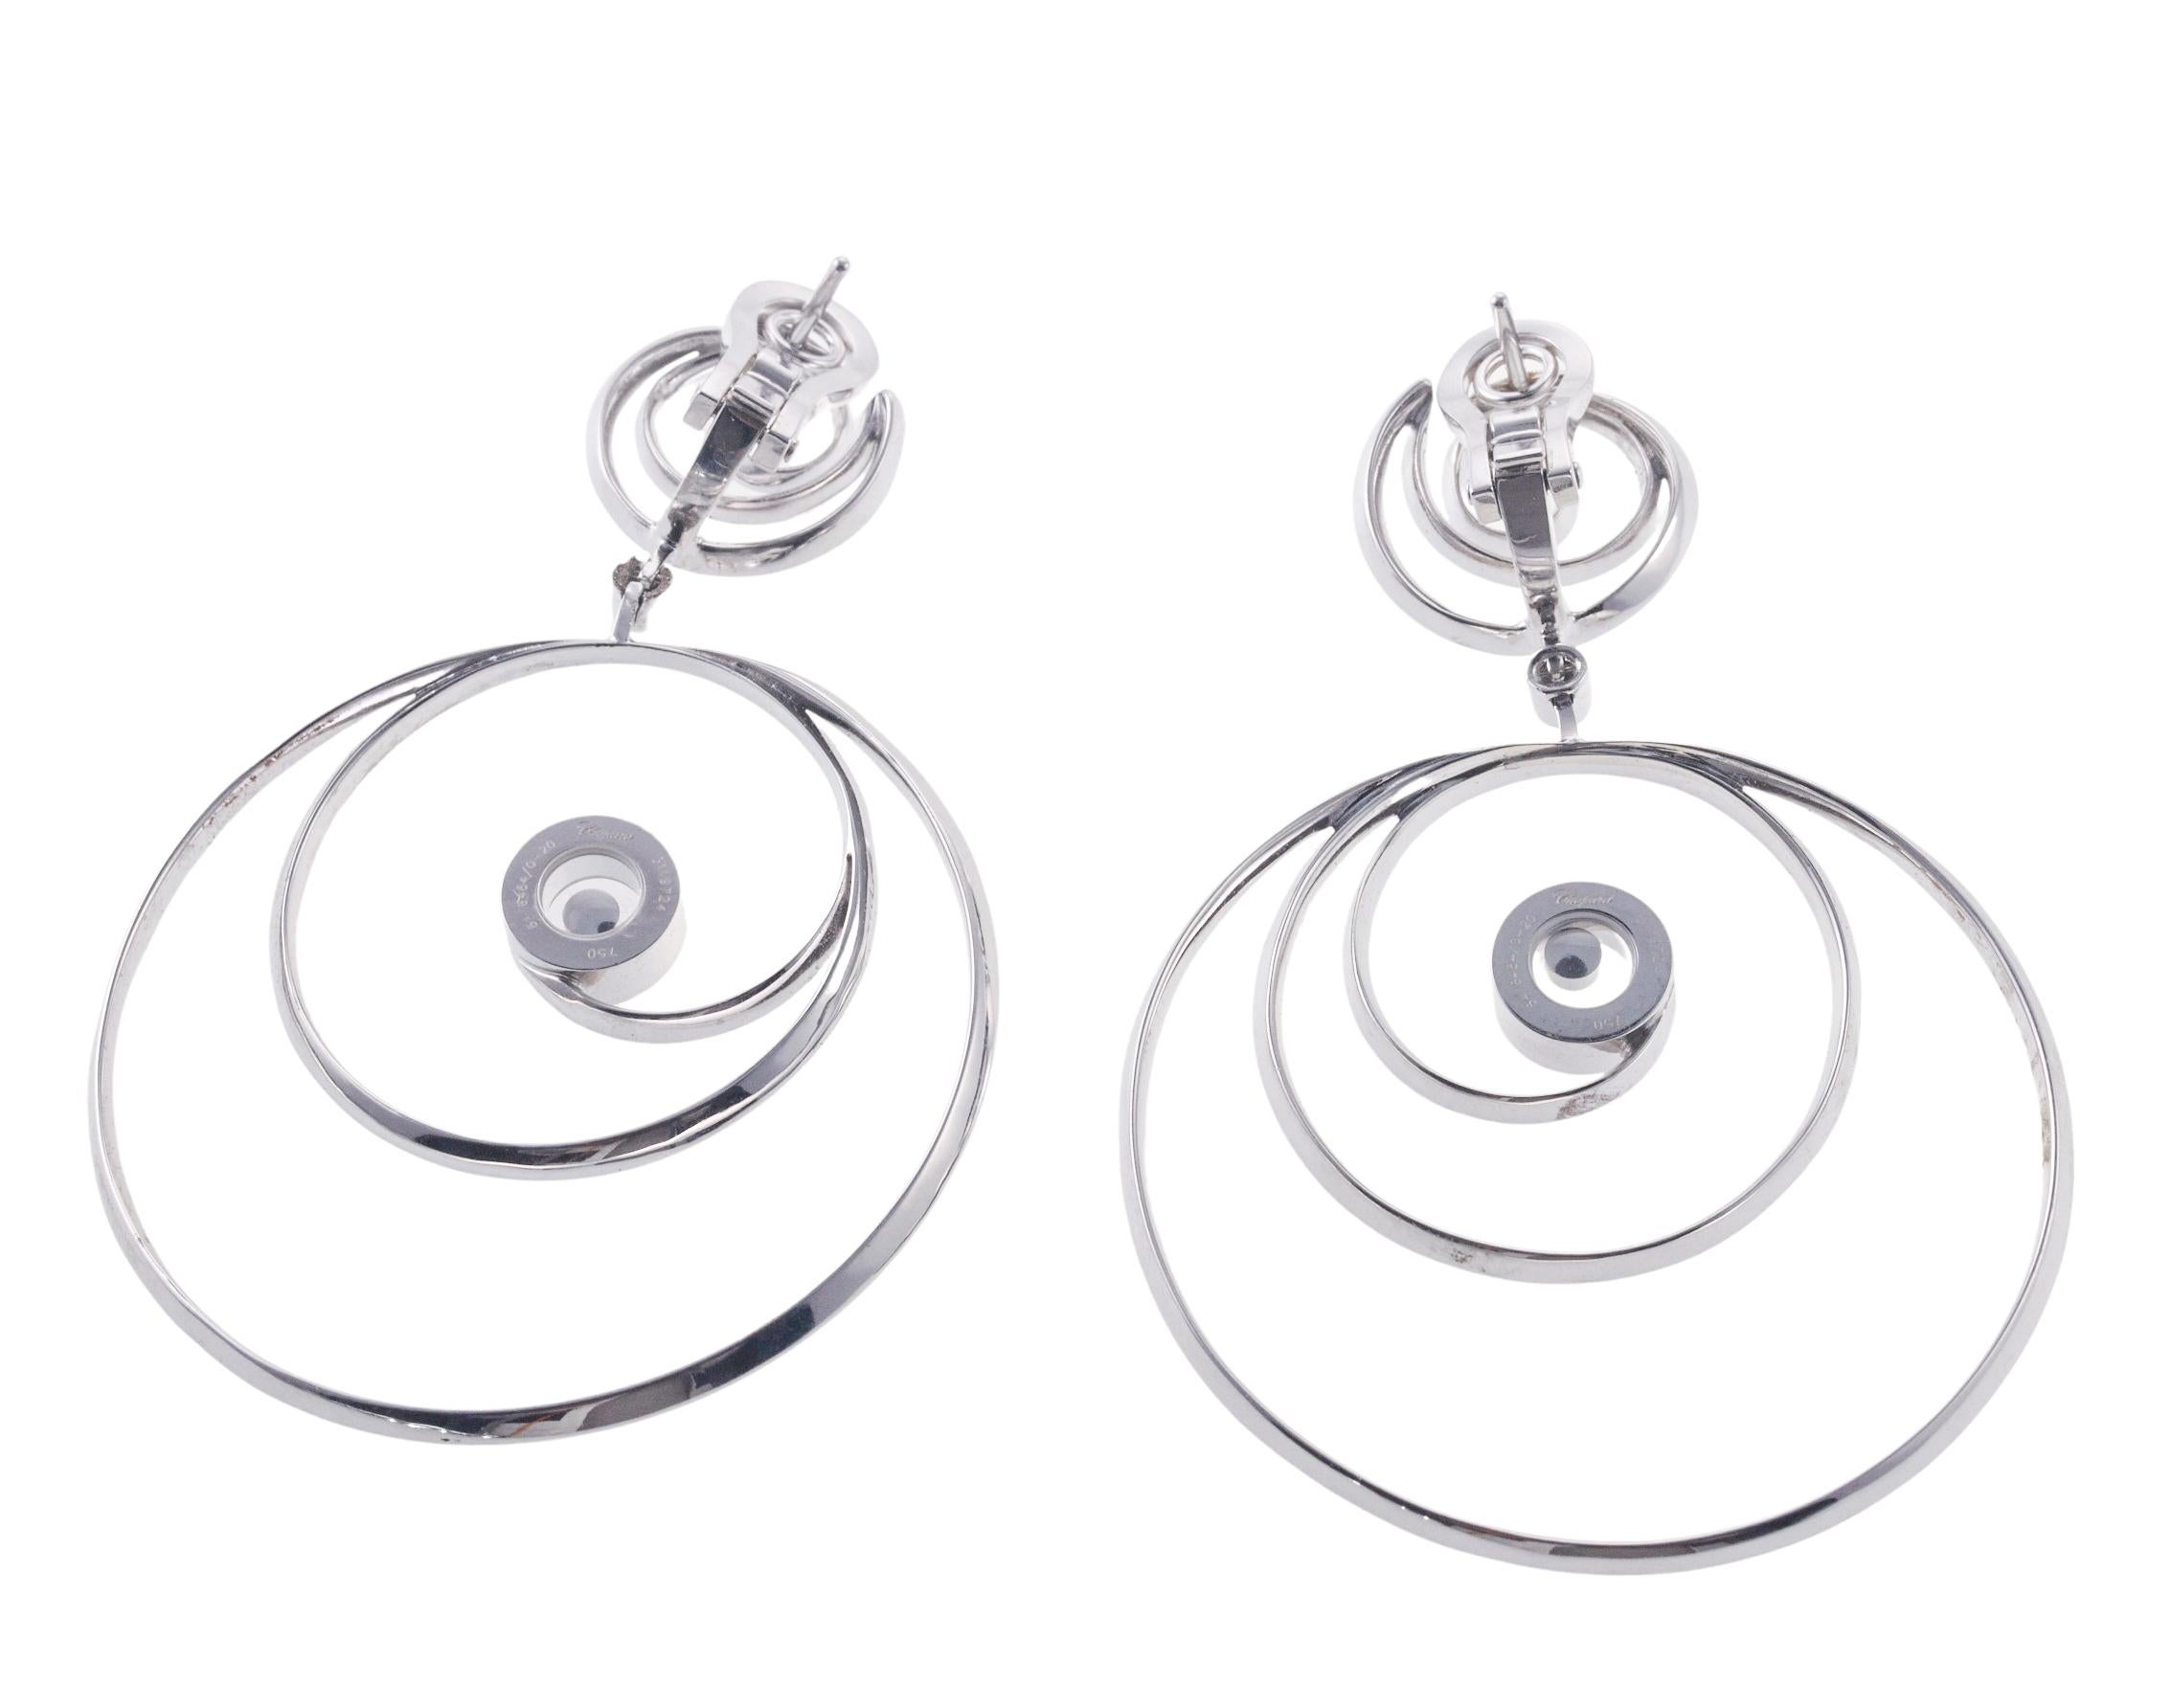 Pair of 18k white gold drop earrings by Chopard for Happy Diamonds collection, set with approx. 1.75ctw in VVS/F-G diamonds. Earrings measure 63mm x 43mm. Marked: Chopards, 750, Serial Number. Weight is 22.2 grams.